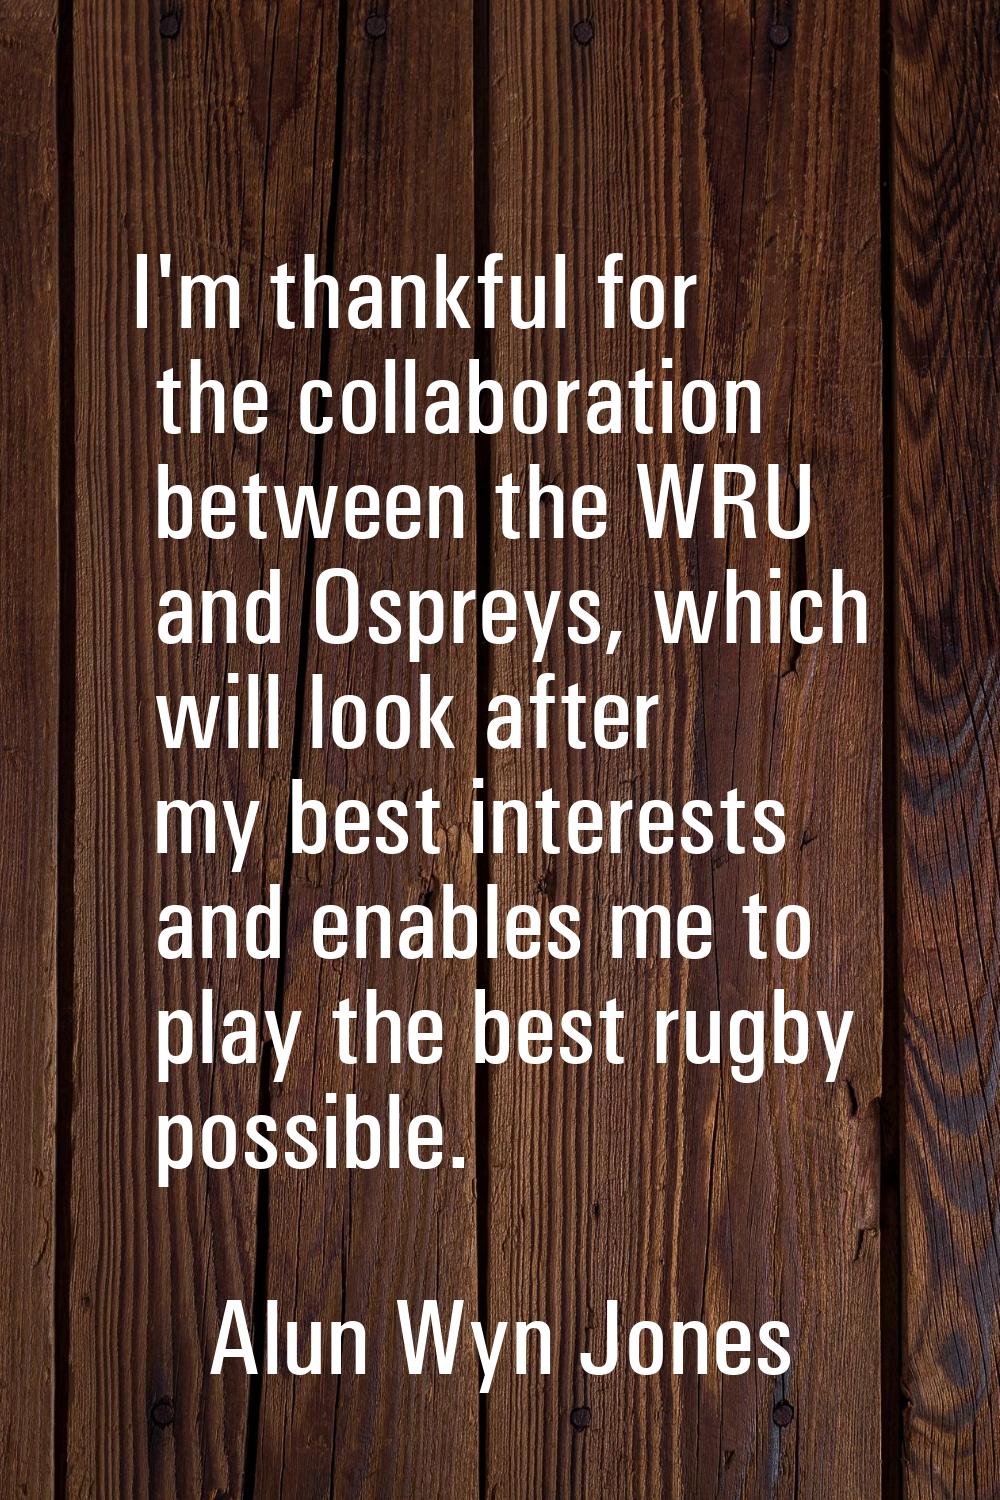 I'm thankful for the collaboration between the WRU and Ospreys, which will look after my best inter